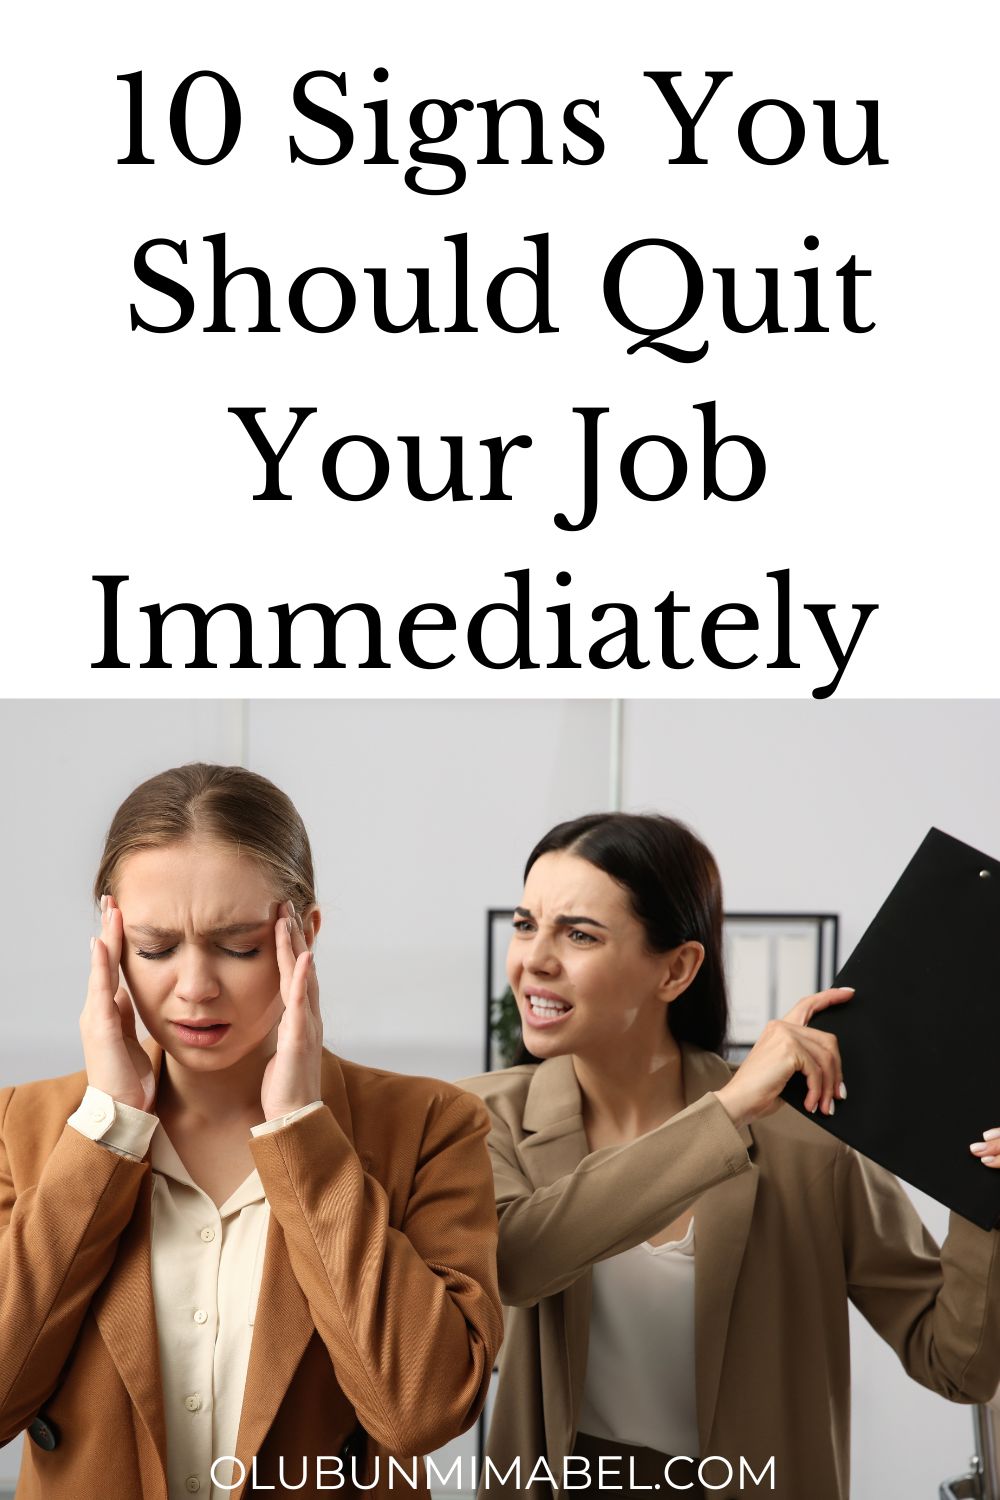 10 Signs You Should Quit Your Job Immediately Olubunmi Mabel 2219